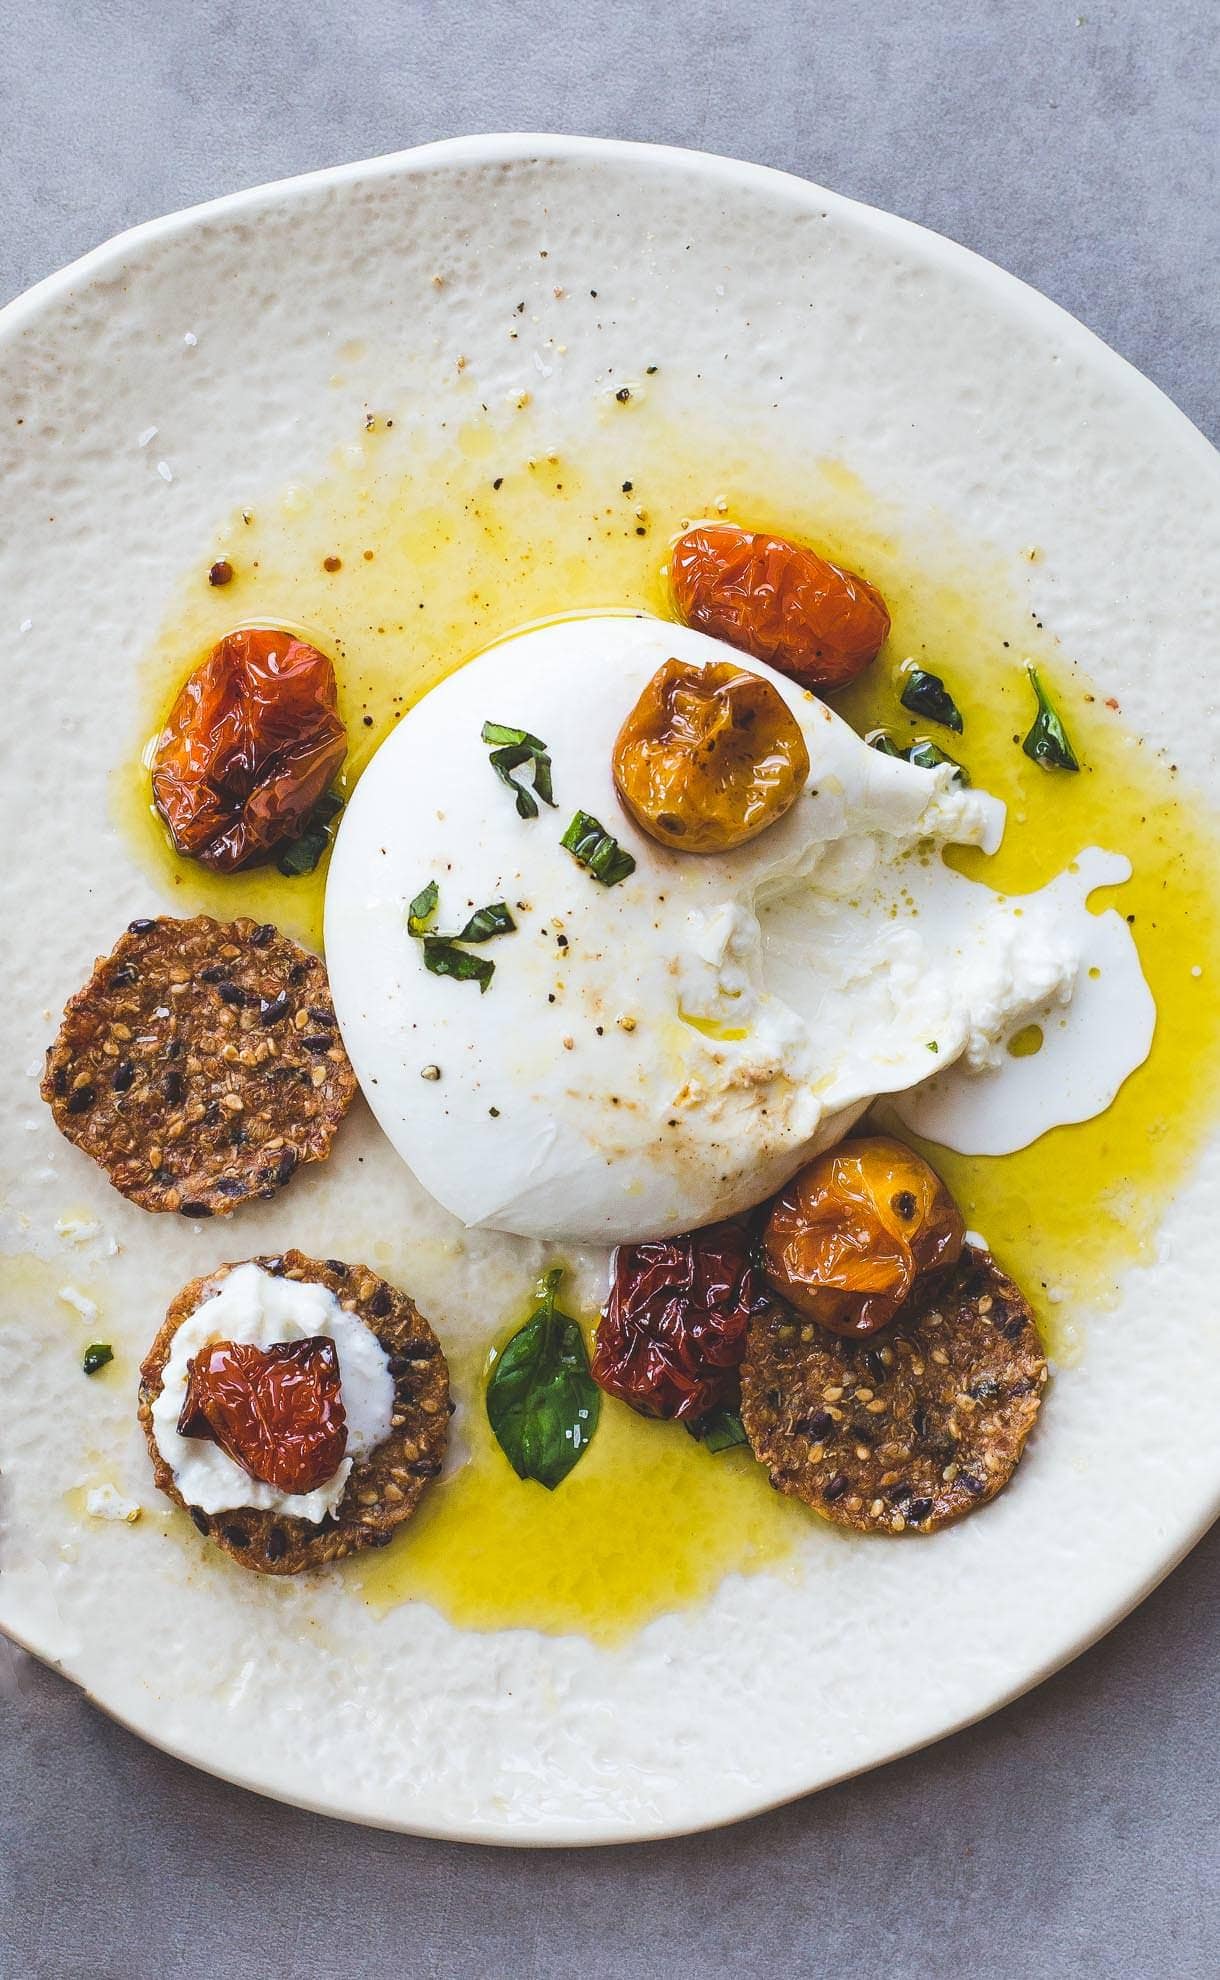 Burrata Cheese with Slow Roasted Tomatoes and Basil